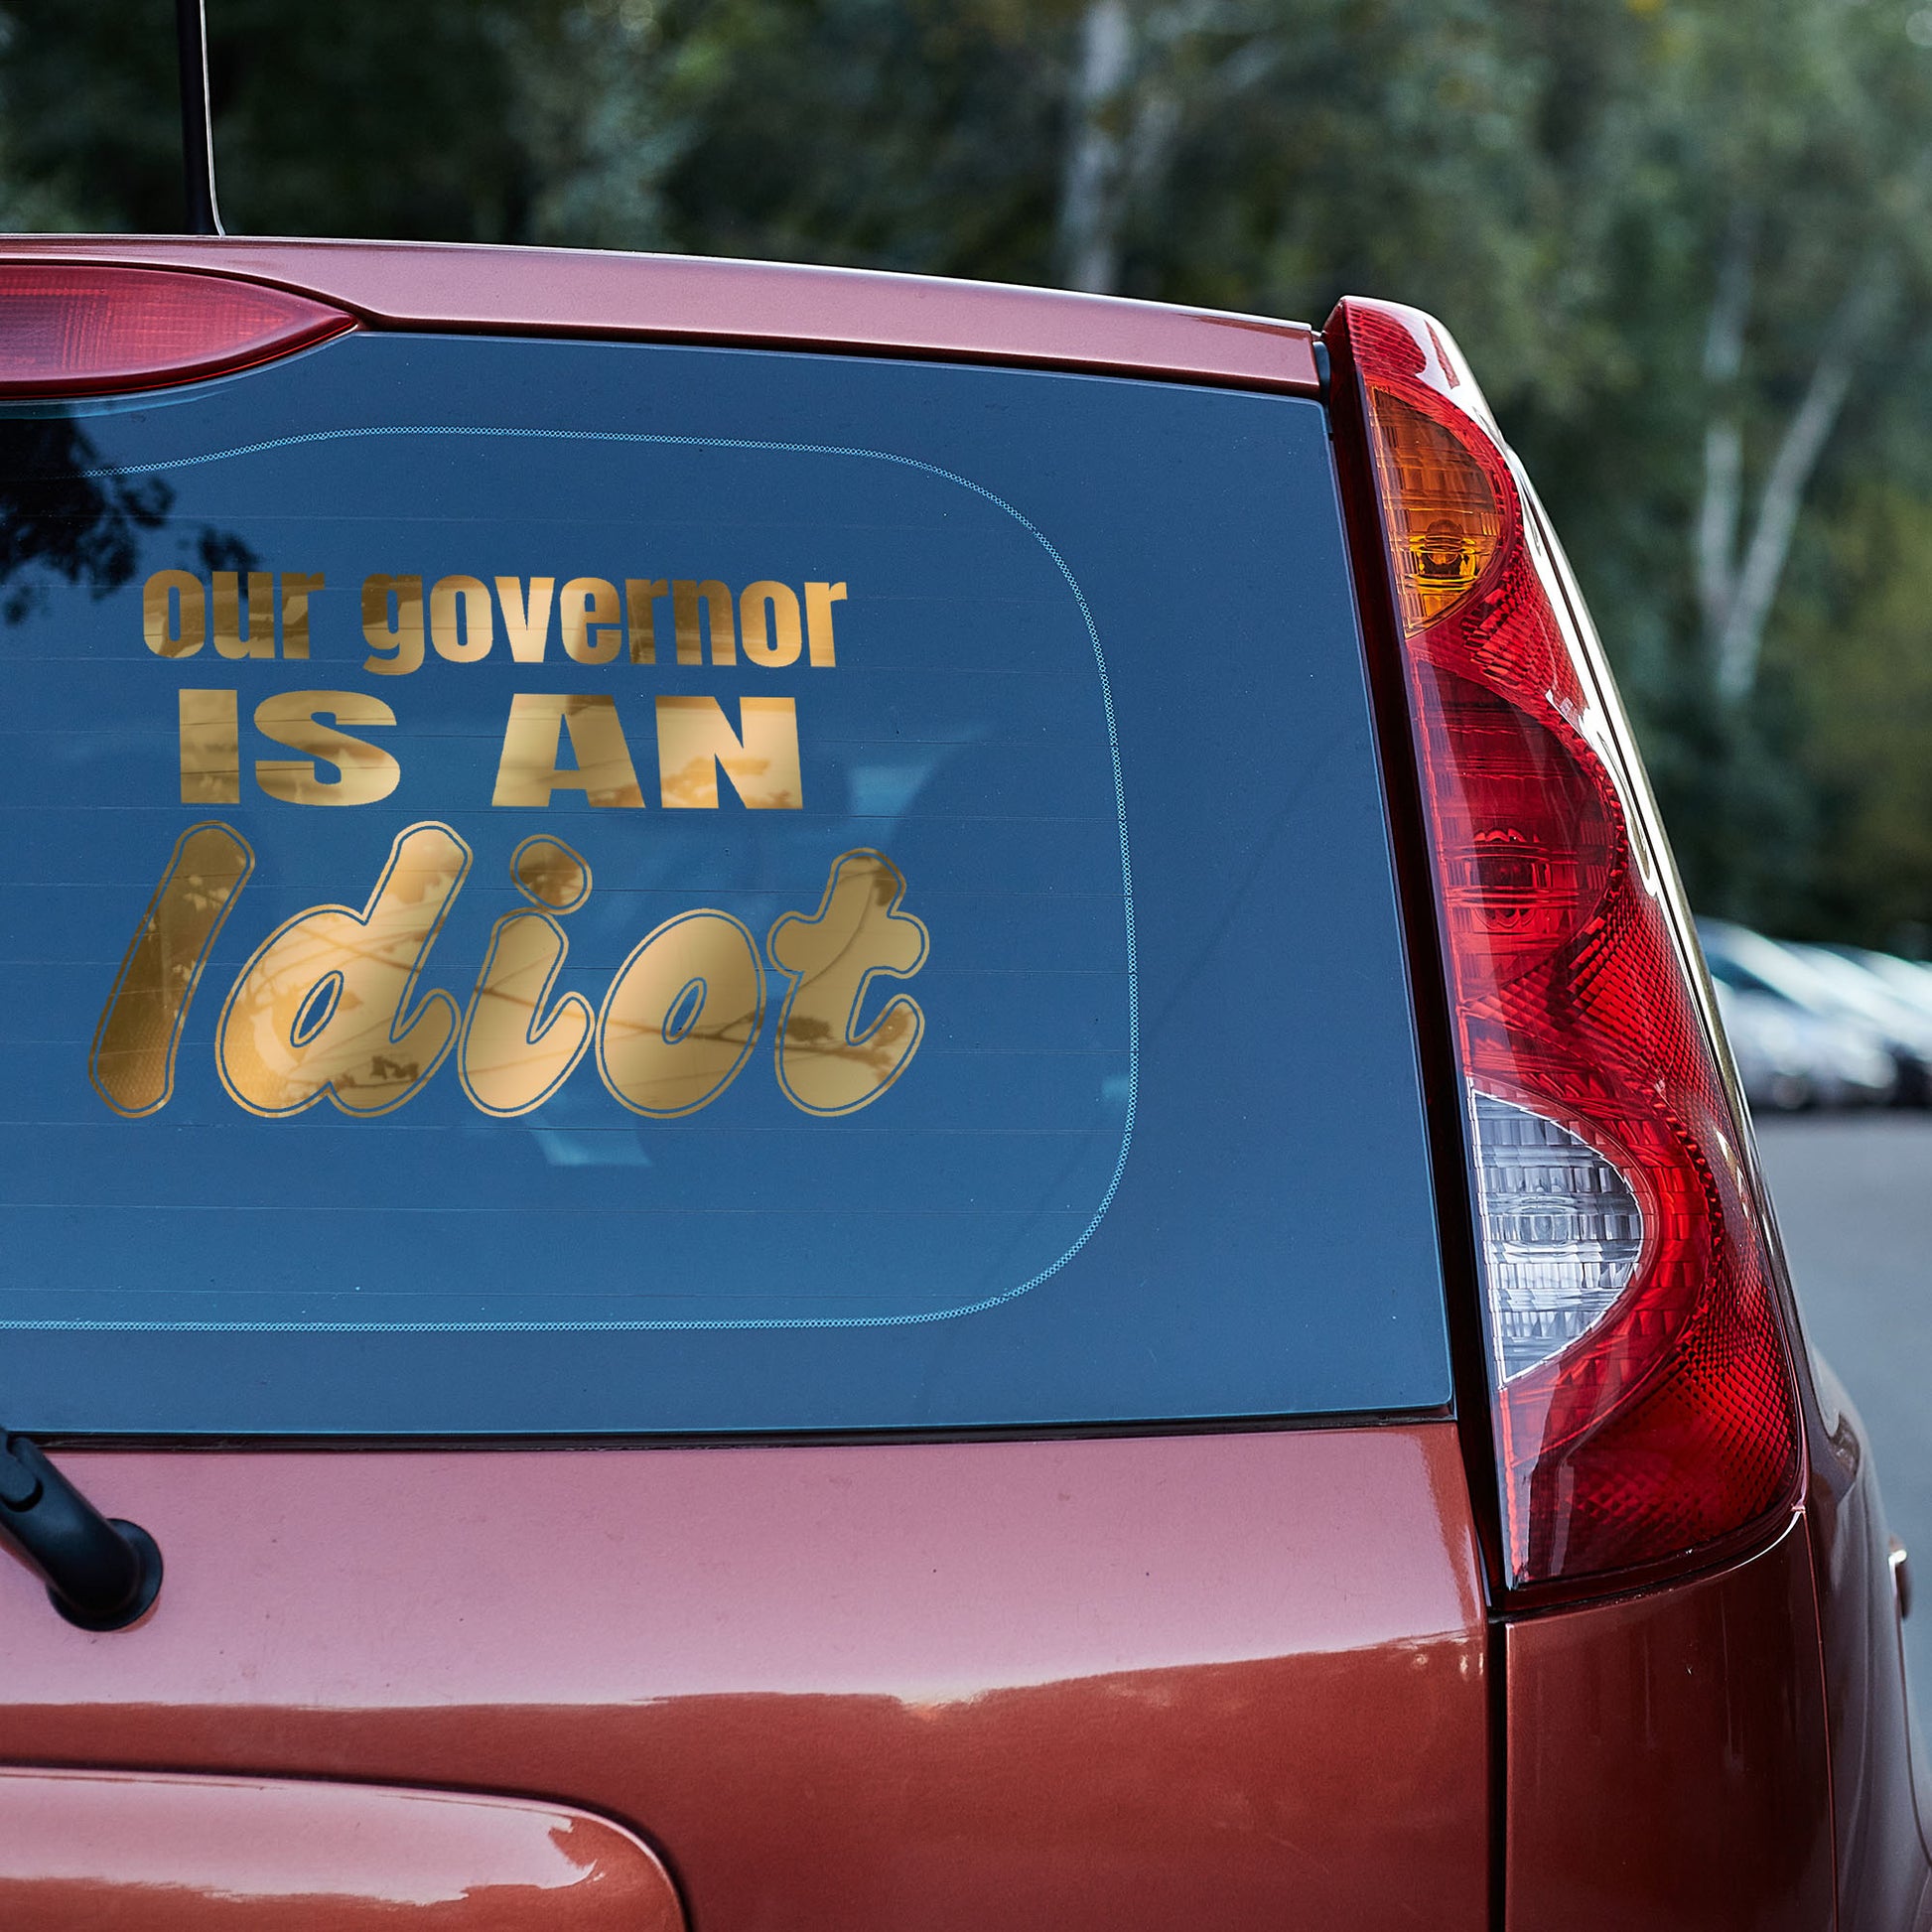 Our governor is an idiot vinyl decal car decal decal for cars decal for trucks Decals for cars Decals for Trucks decals for tumblers decals for vehicles door decal funny decals Window decals